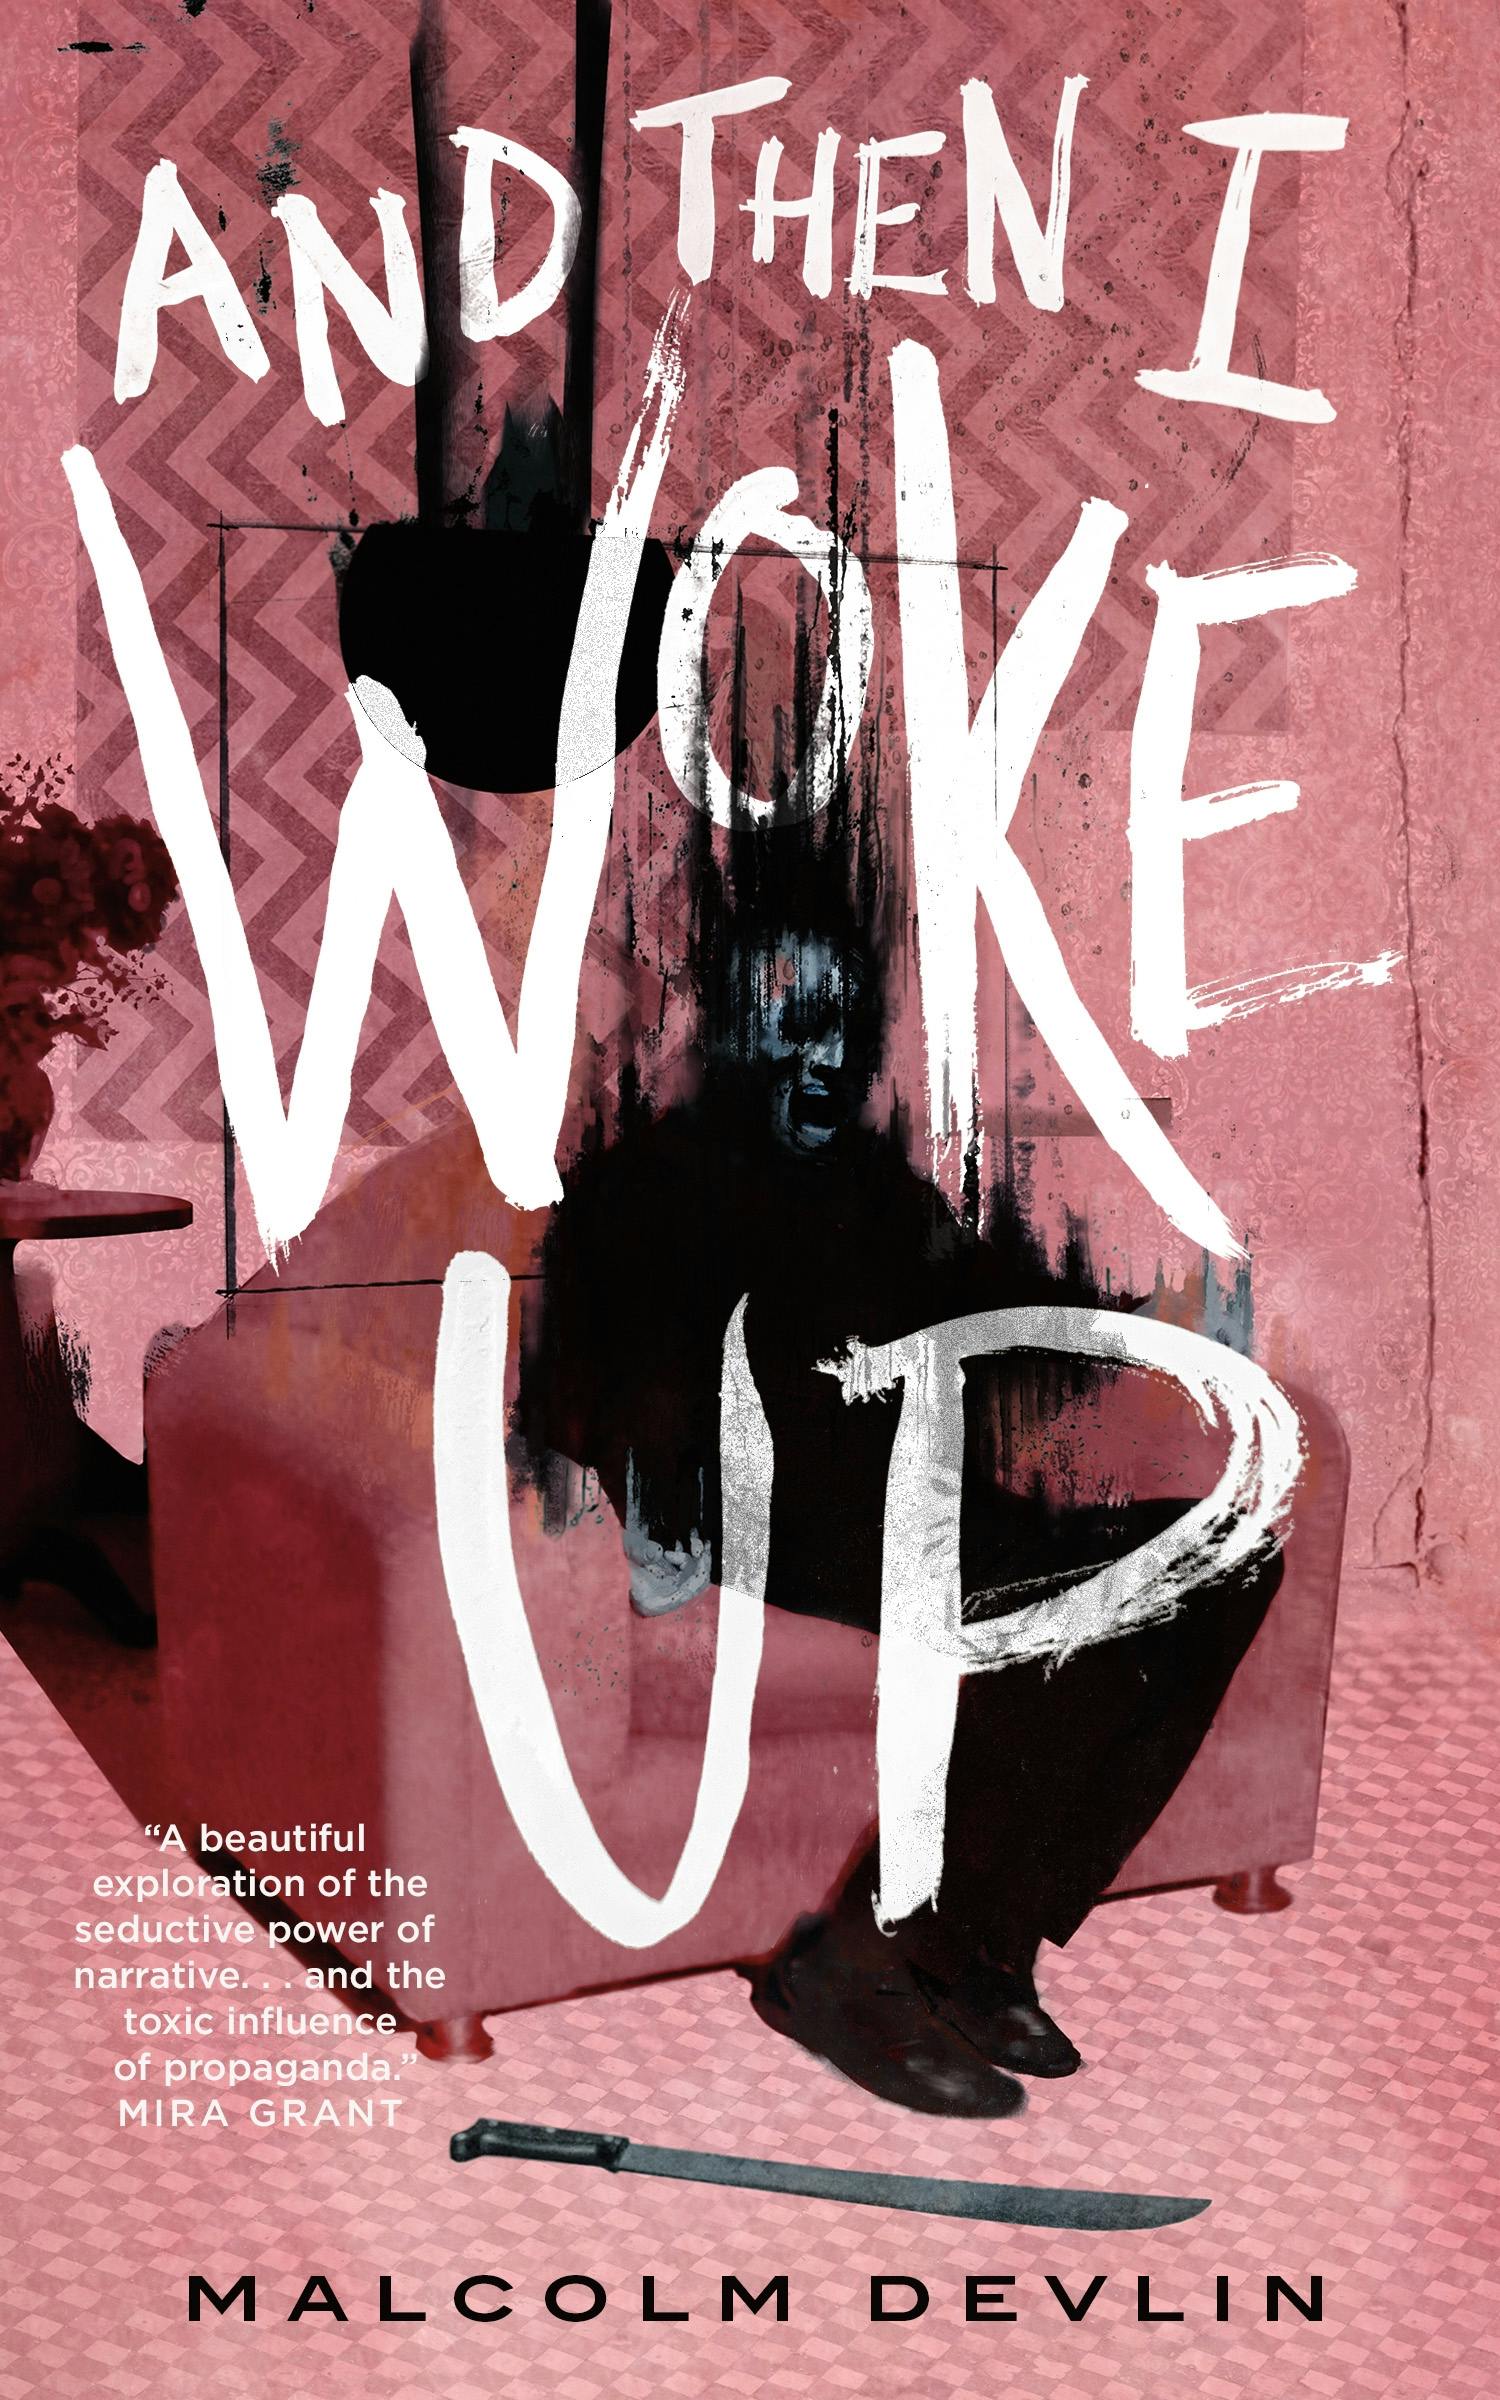 Cover for the book titled as: And Then I Woke Up